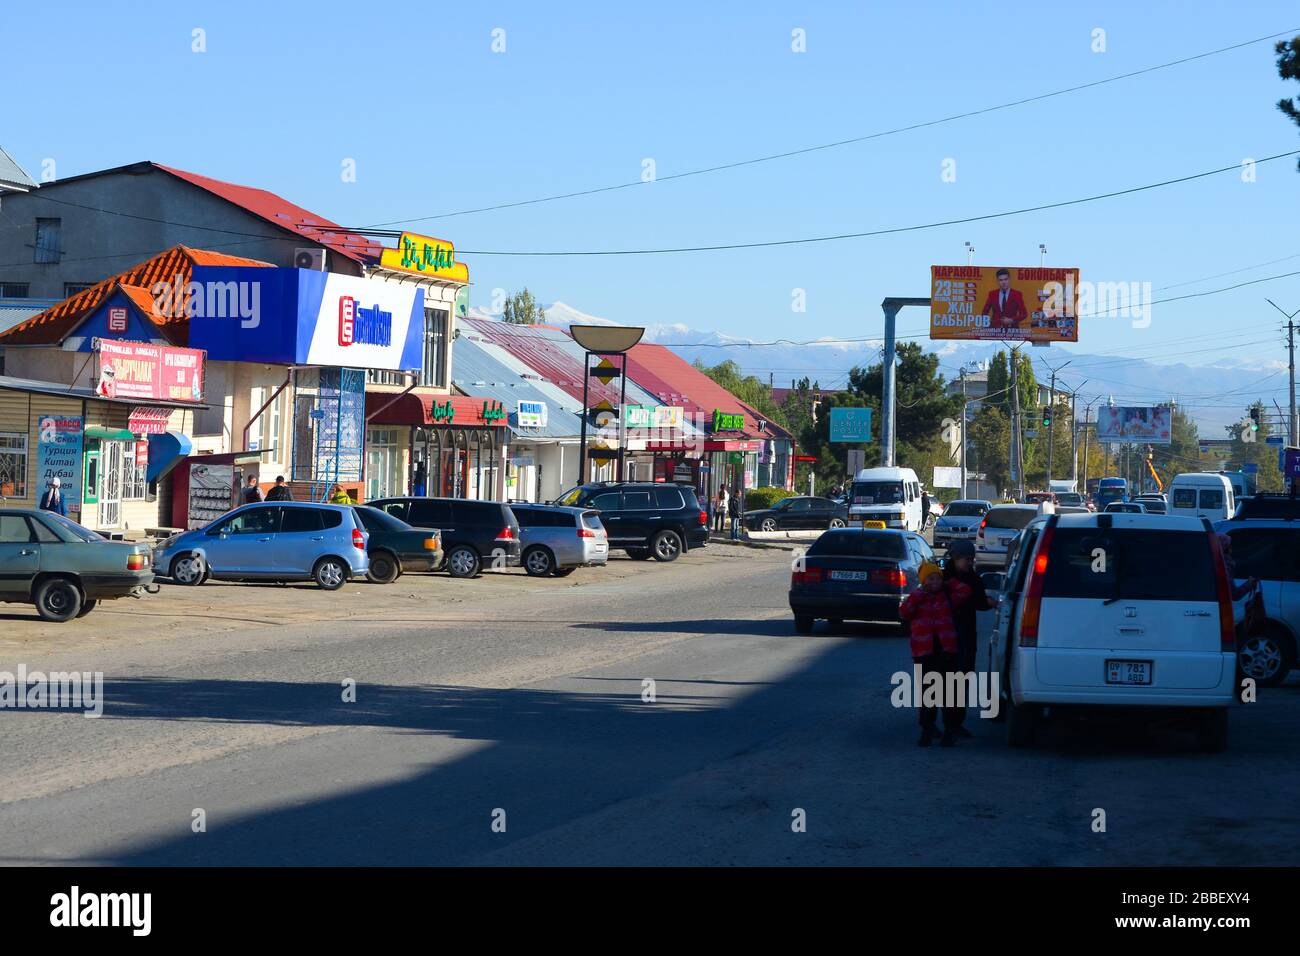 Busy street with multiple cars and commerce in the kyrgyz small town of Karakol in Issyk Kul Region in Kyrgyzstan. Previously Przhevalsk city. Stock Photo